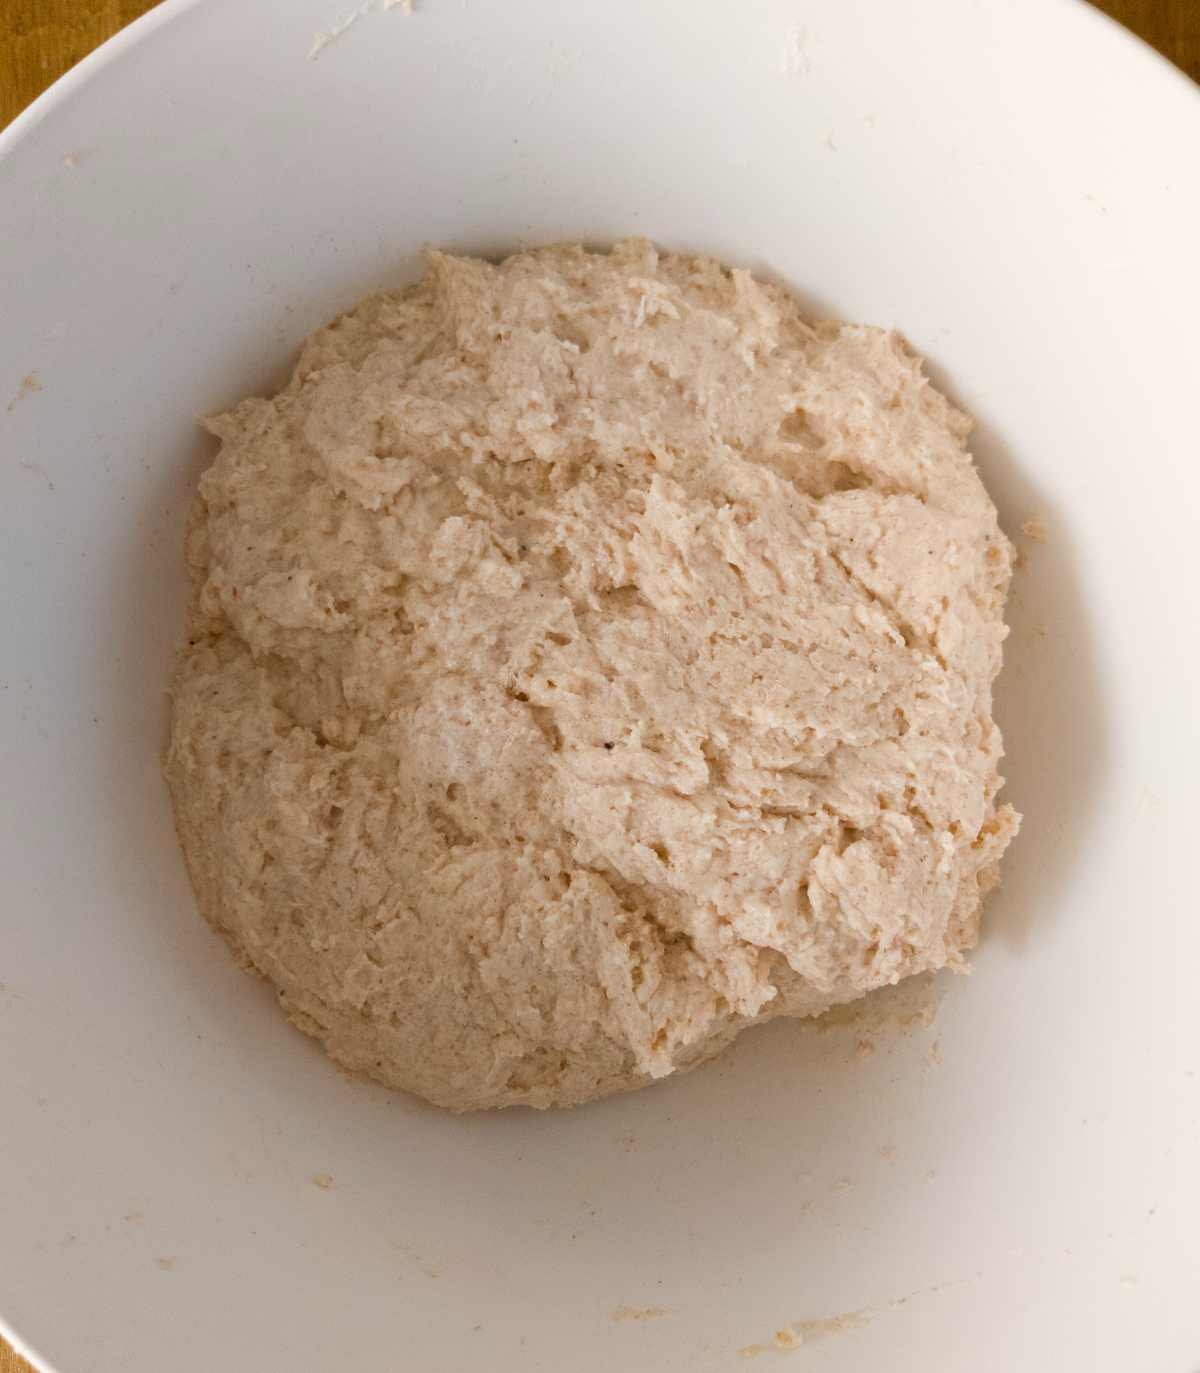 The dough mixed in a bowl.